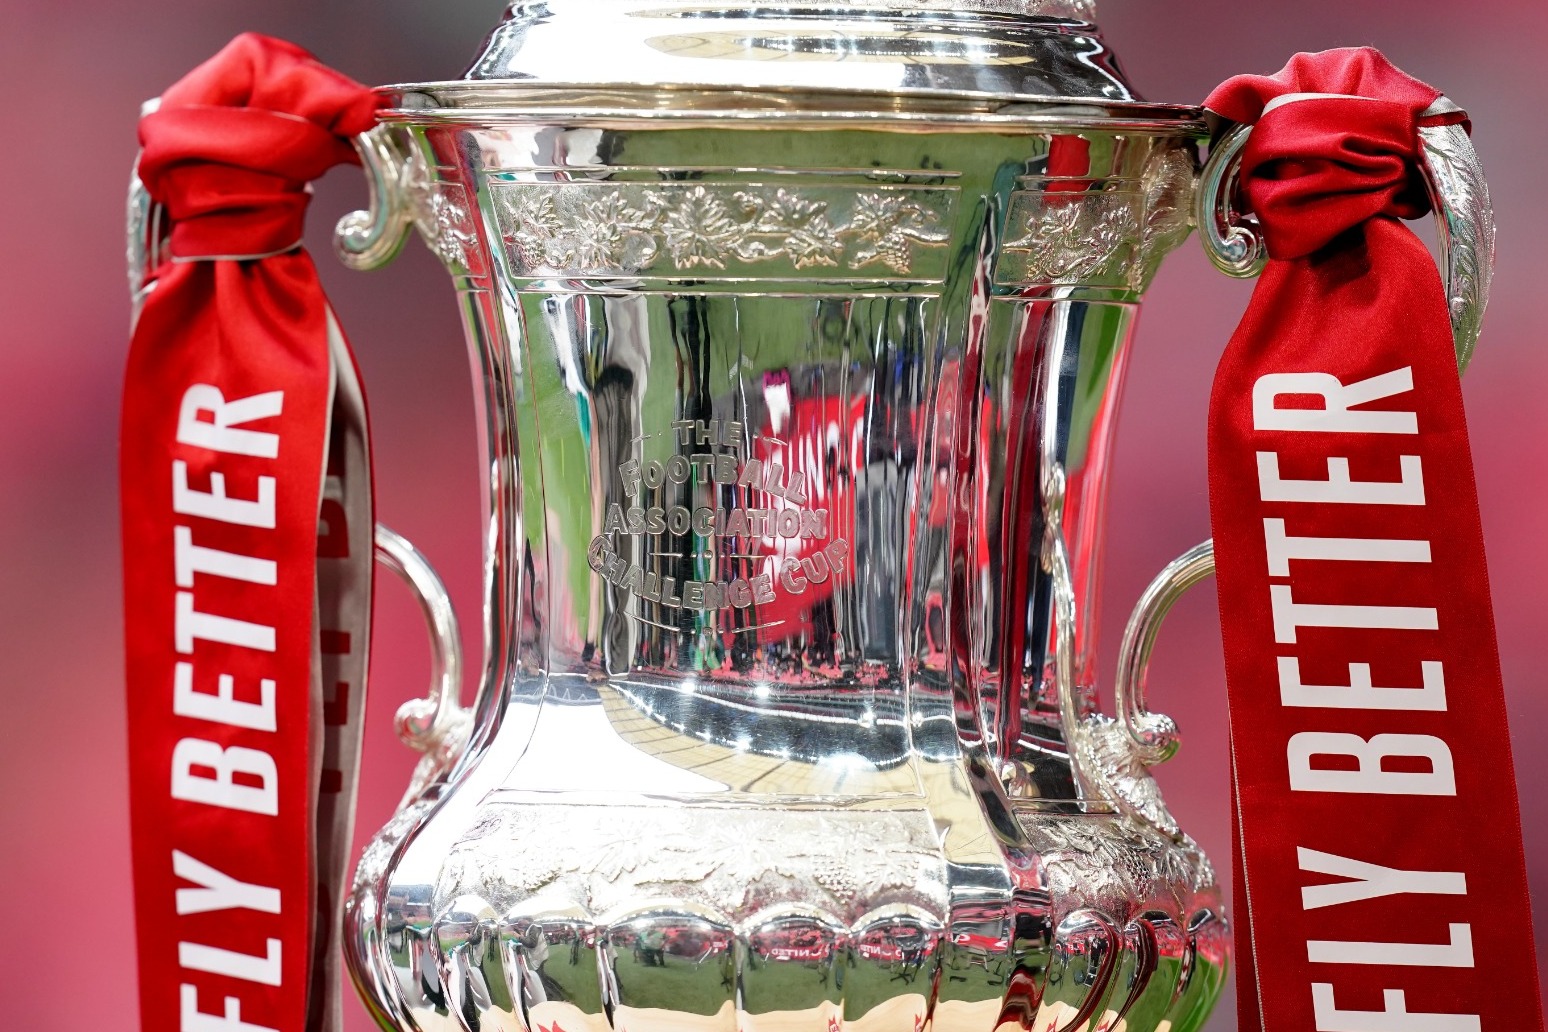 Rail strikes announced for day of FA Cup Final 